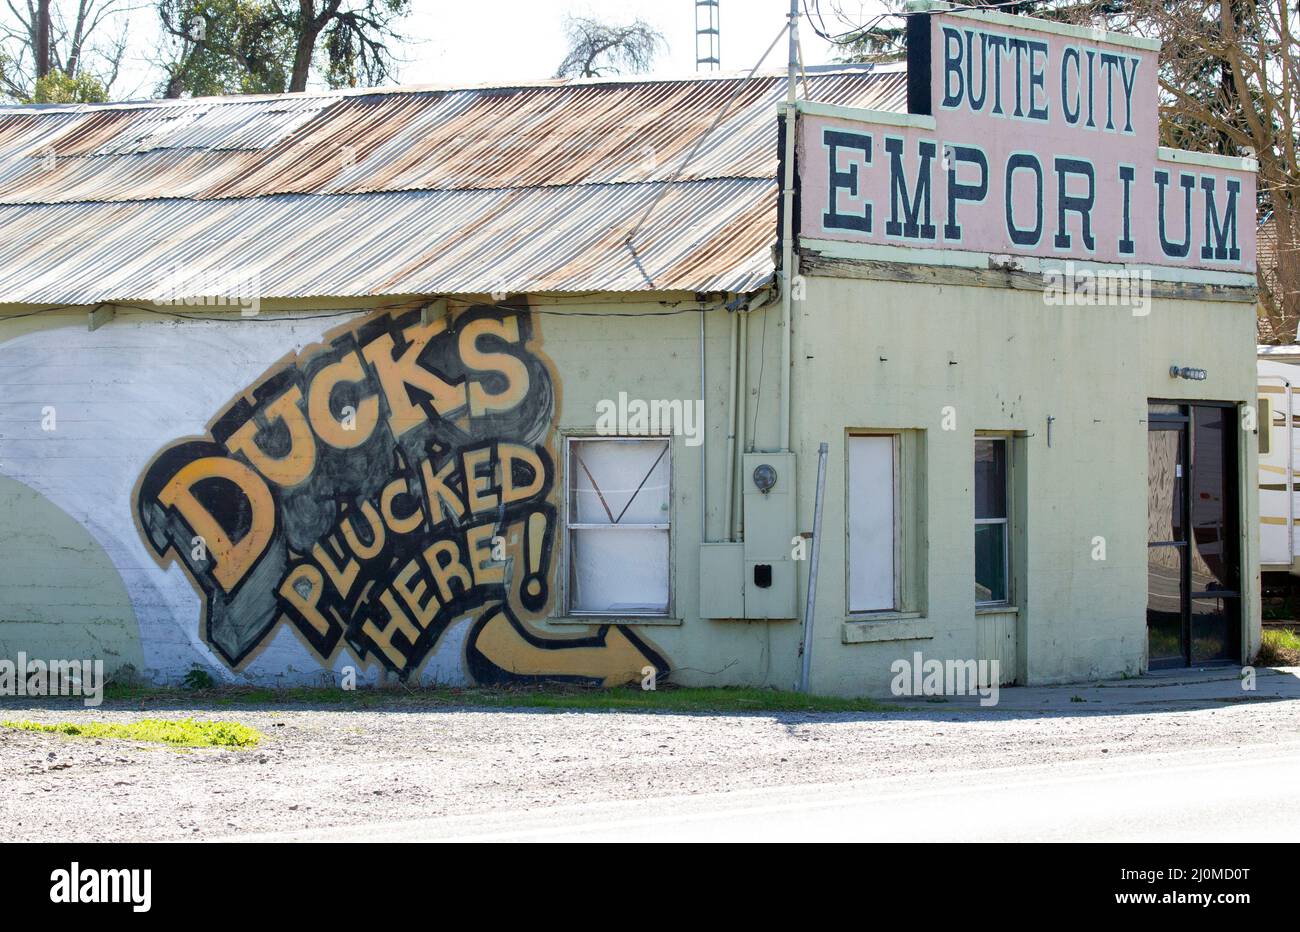 Ducks Plucked Here Sign on Side of Building Stock Photo